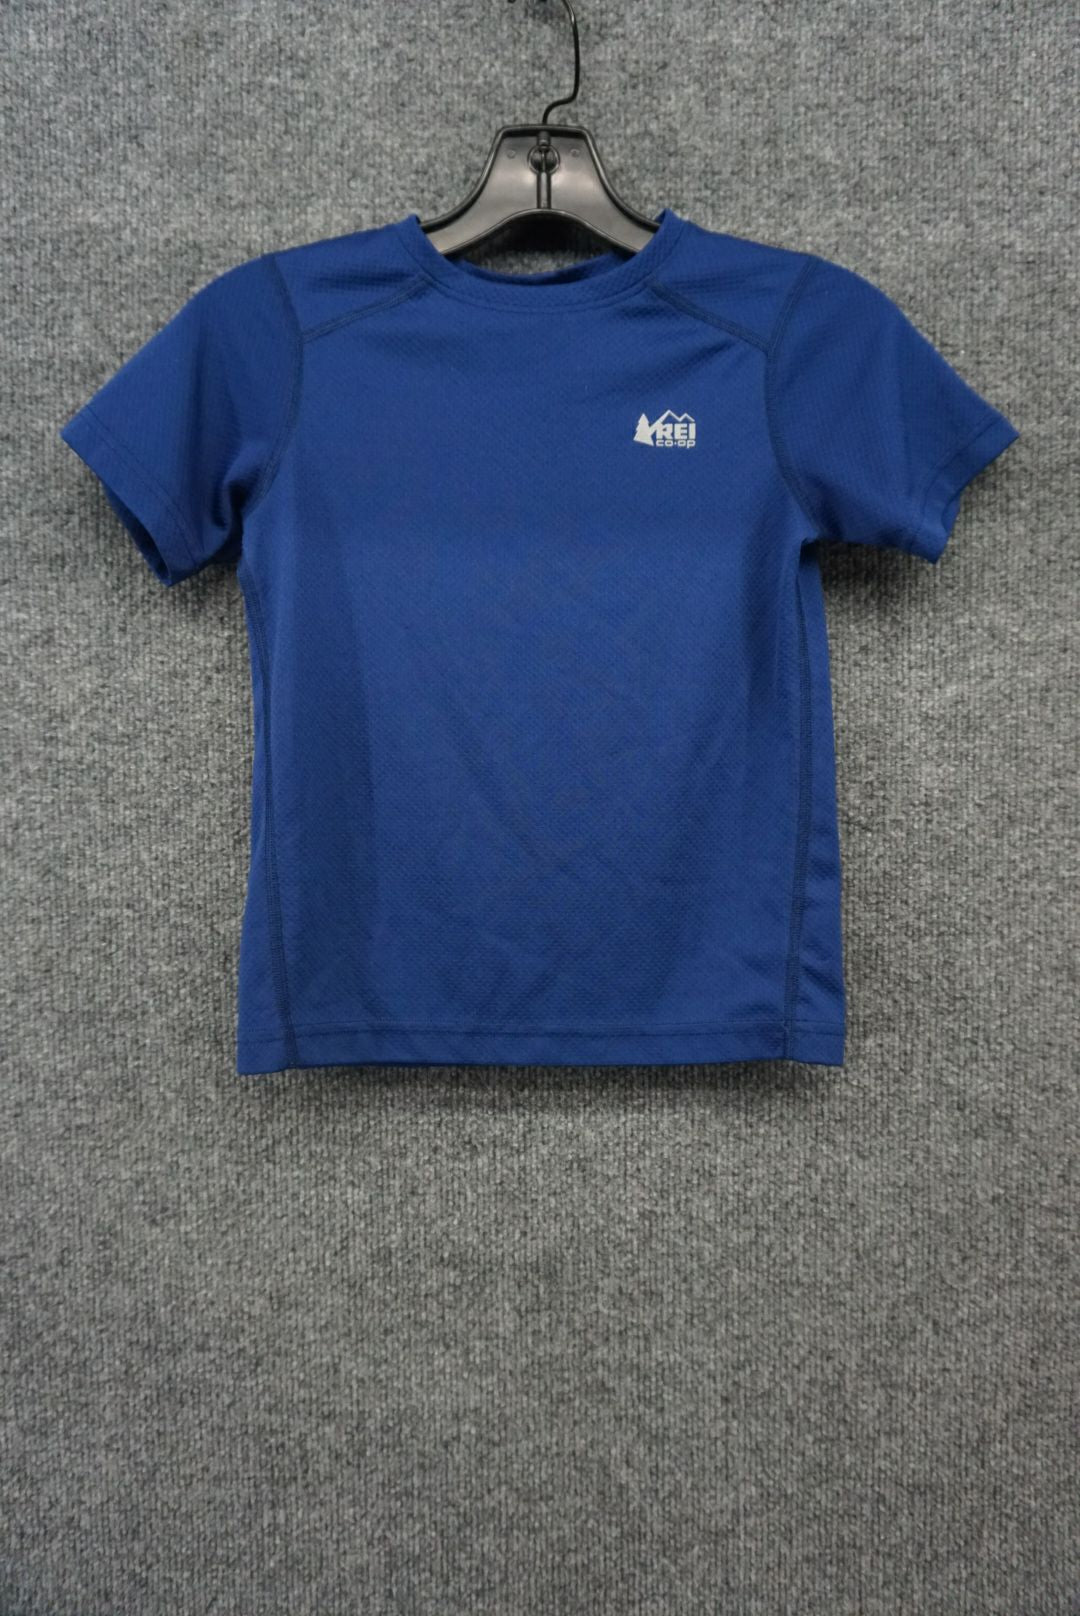 REI Size Y Small Youth S/S Active Top